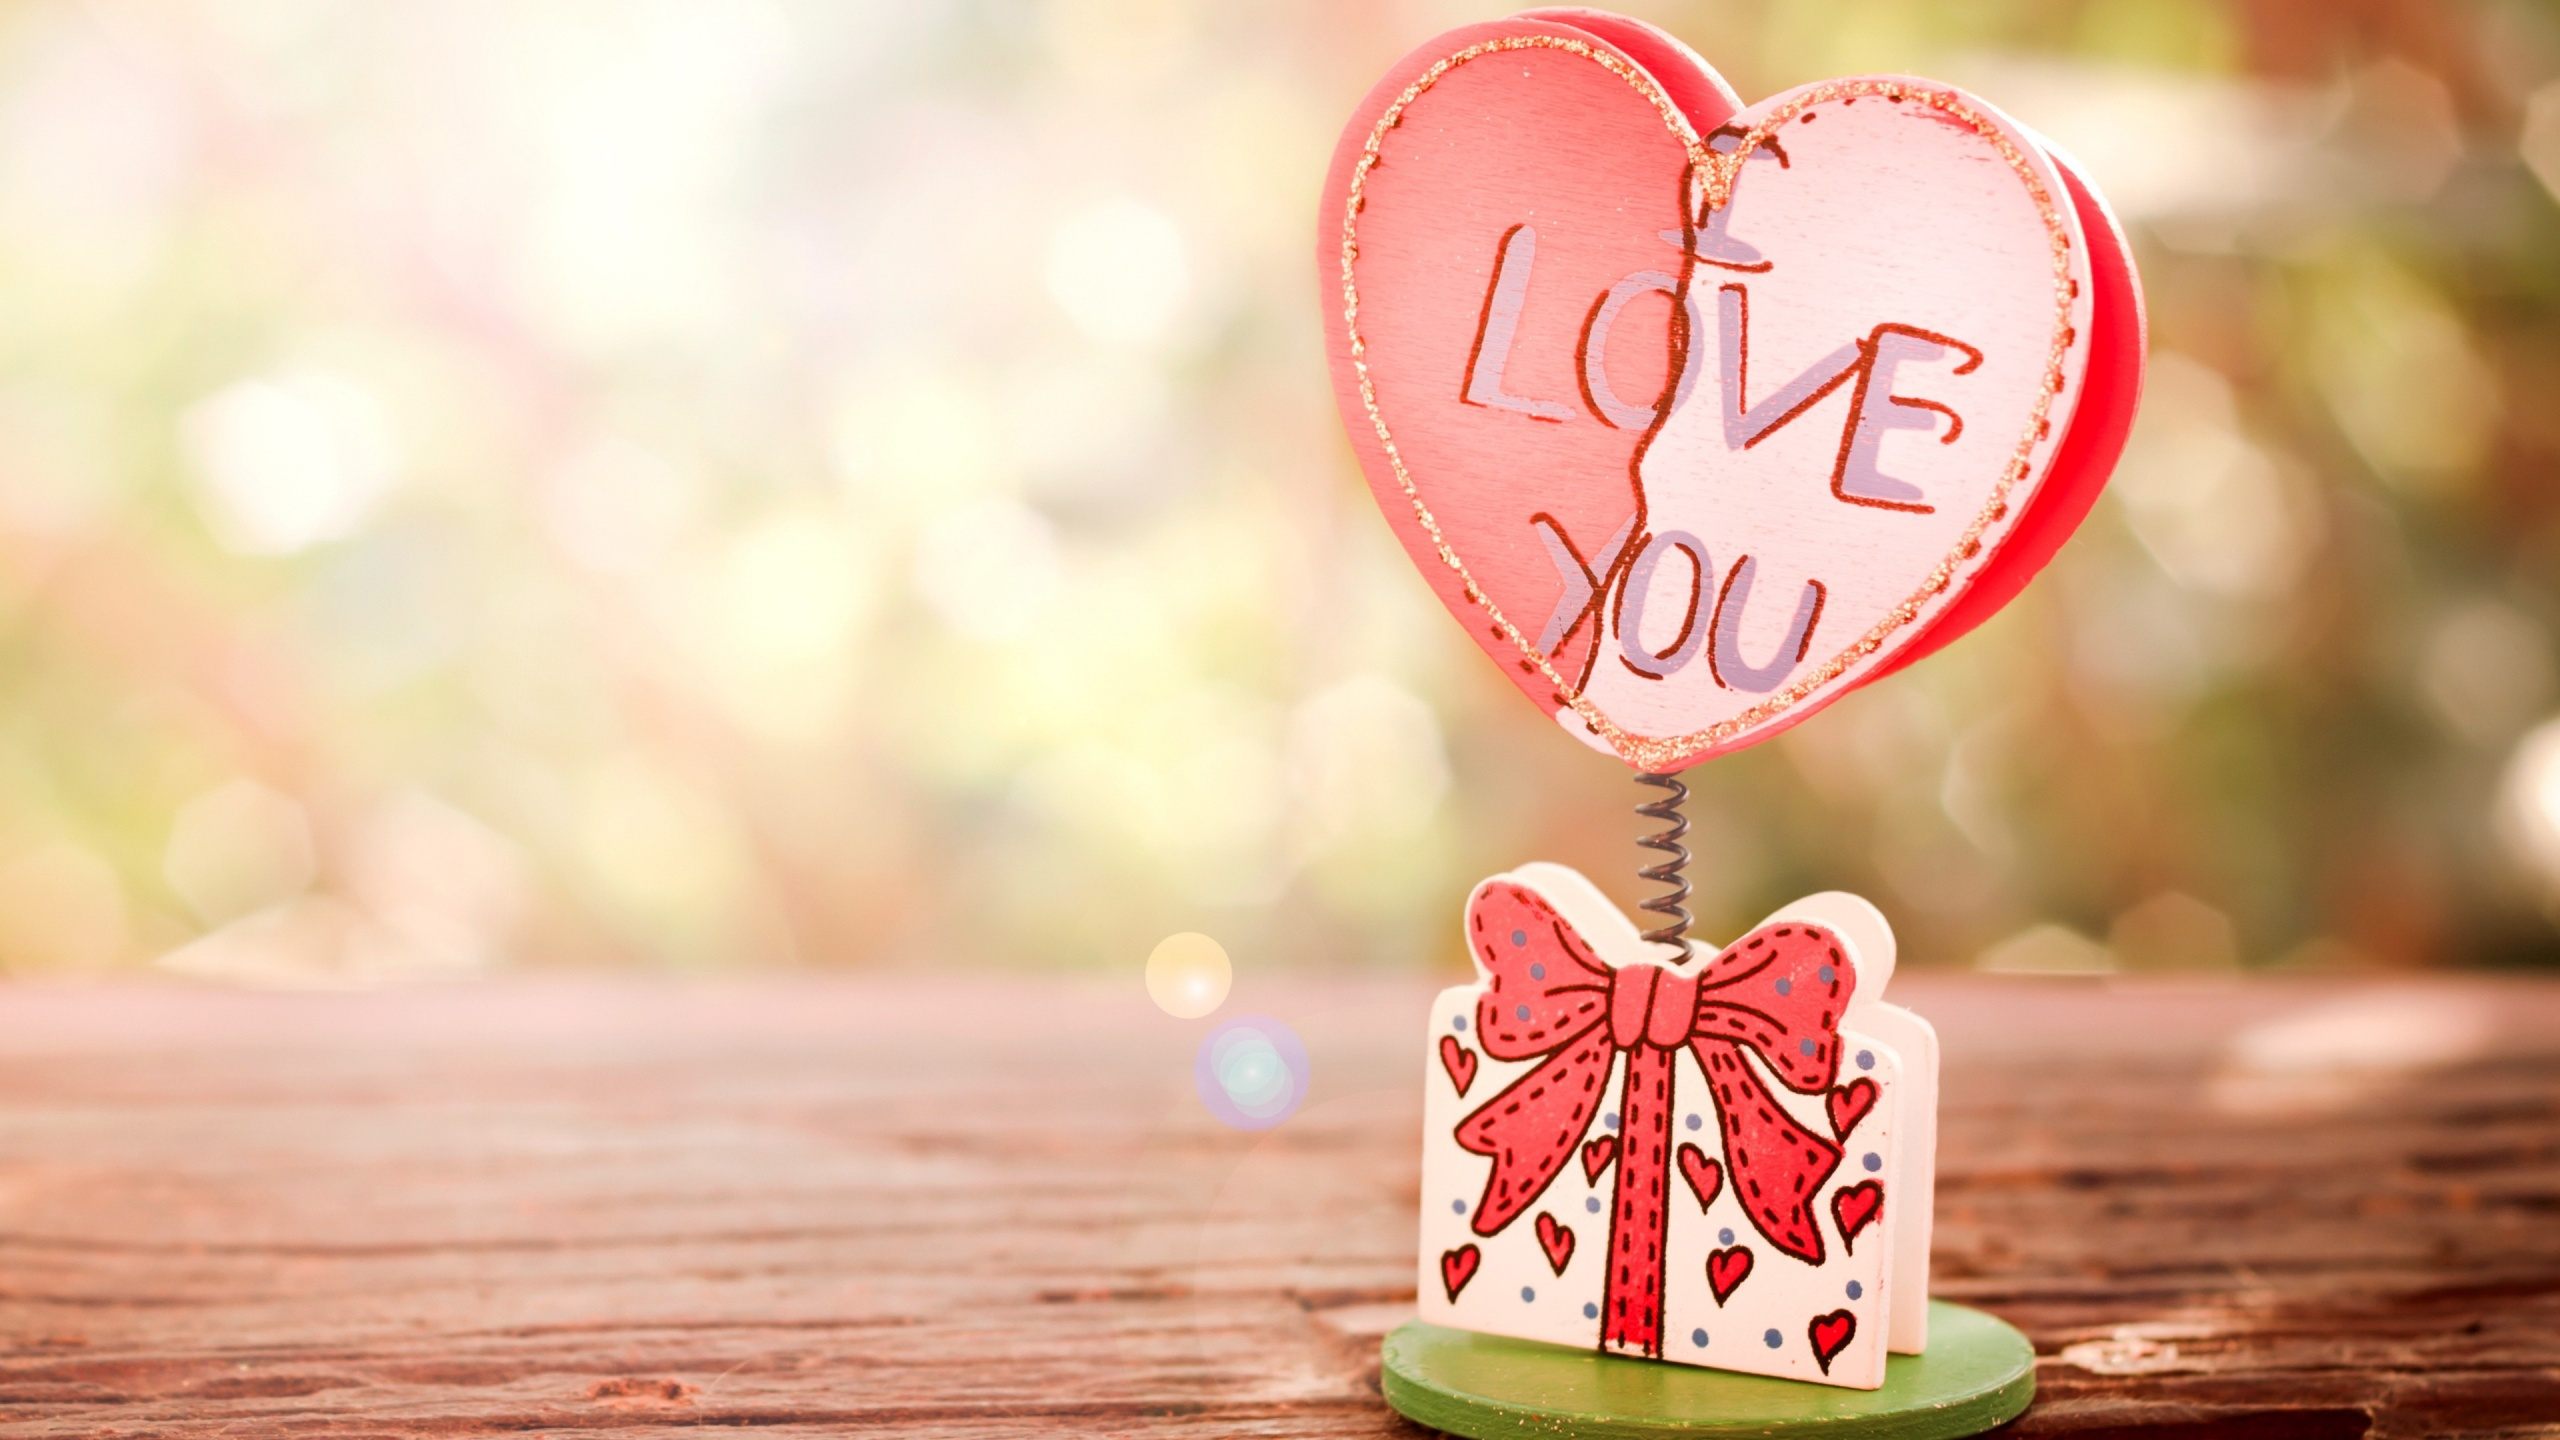 Oay Image Of Love You Beautiful Wallpaper